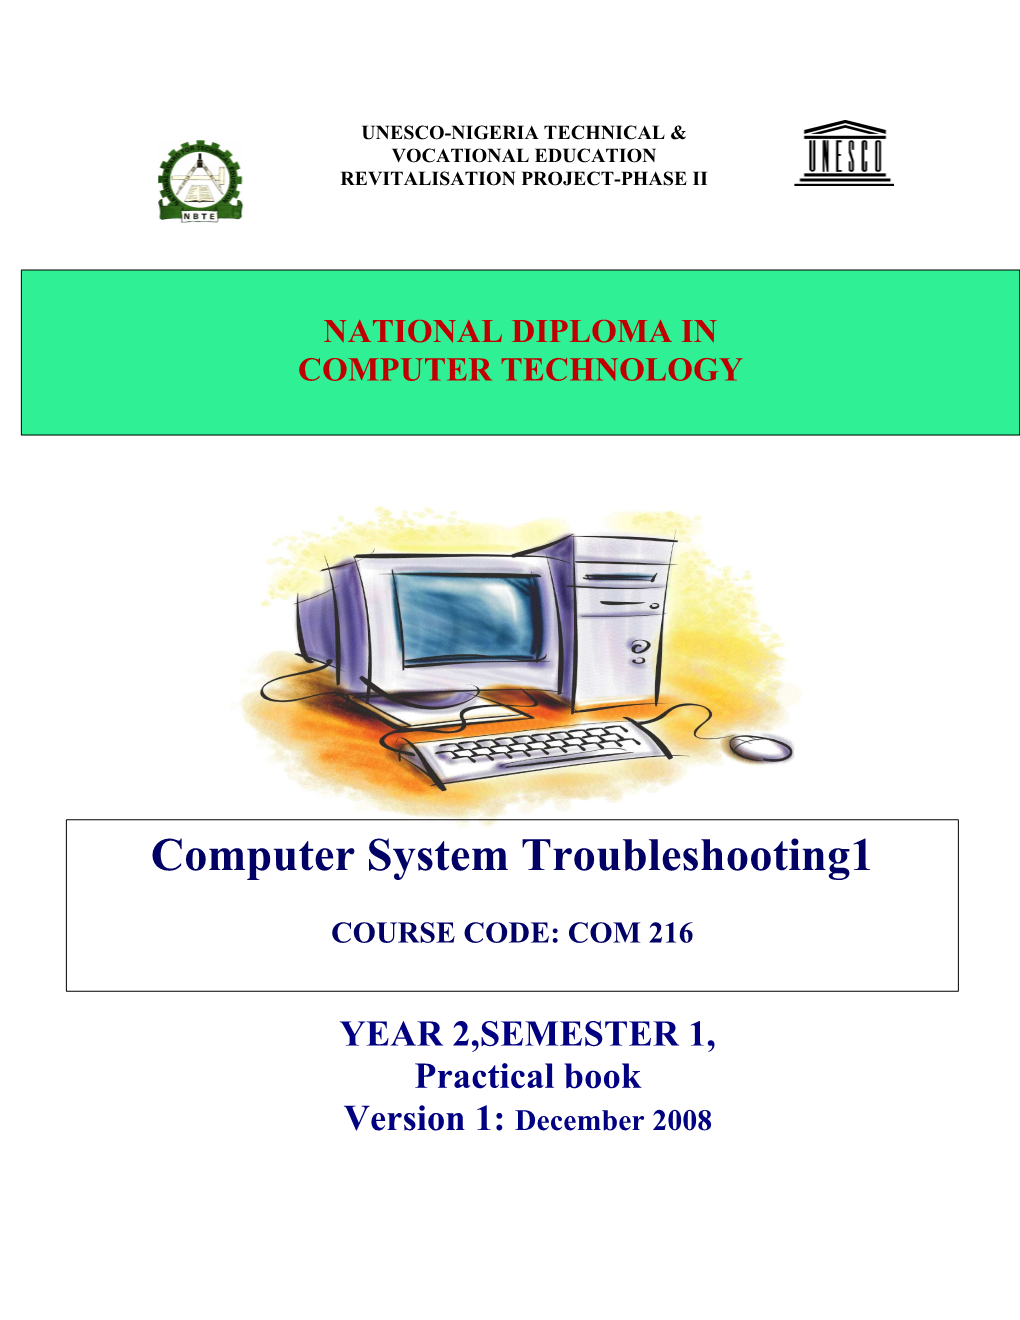 Com 216 Comp Trouble Shooting I Practical Book